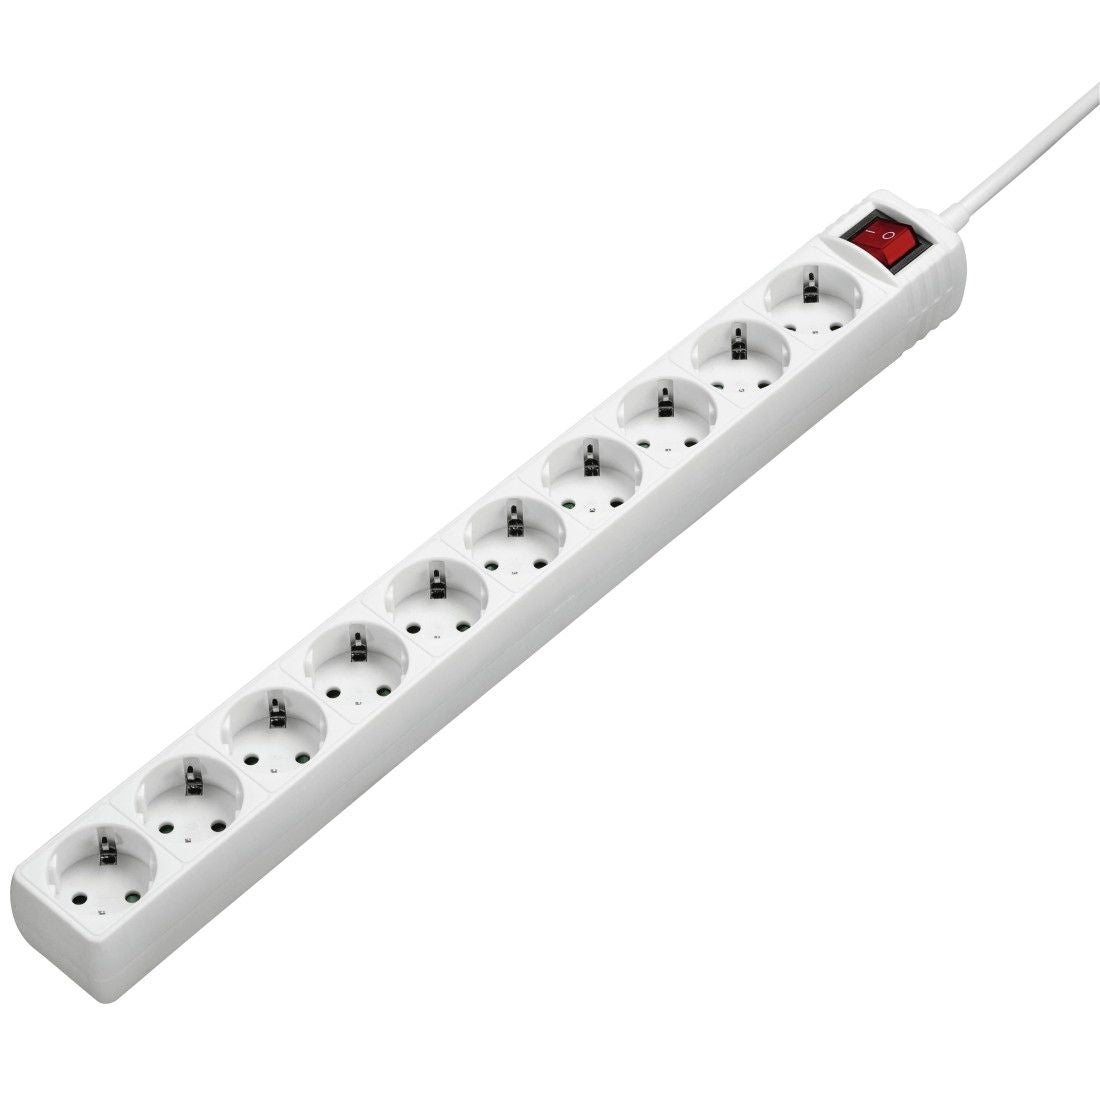 Extension cord HAMA 10 sockets, 3.0mt white - 137234